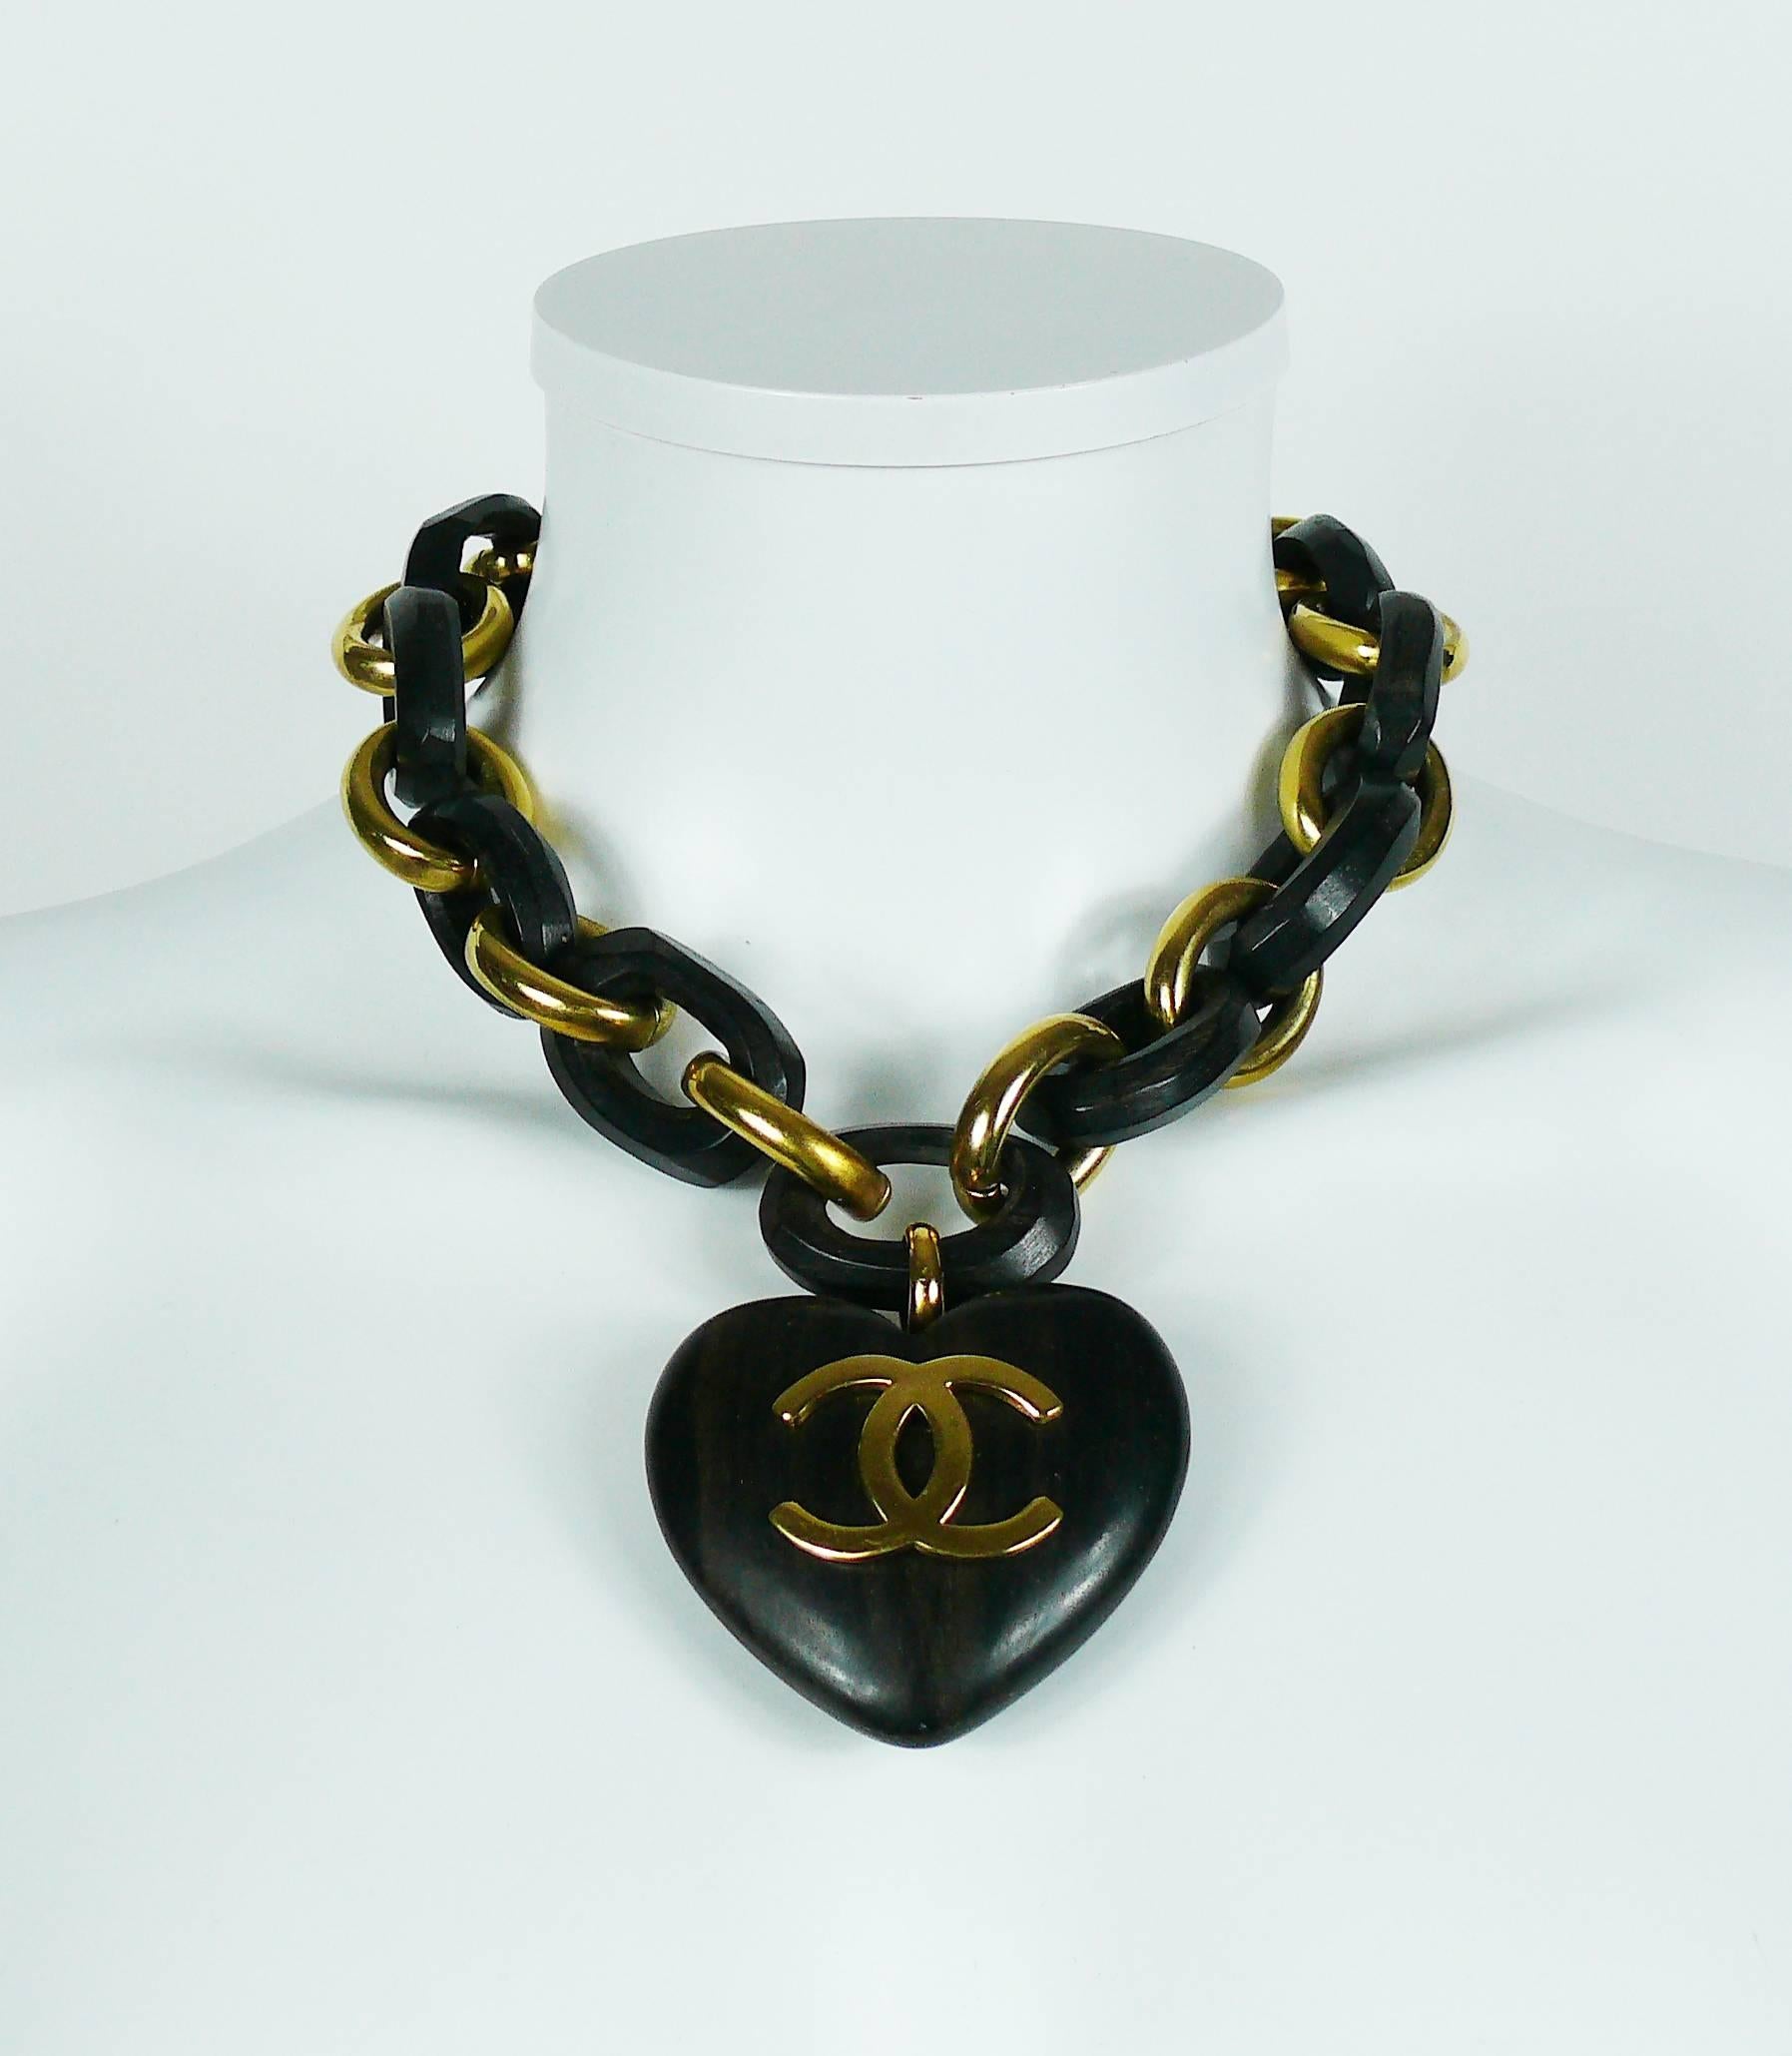 CHANEL vintage hard to find iconic necklace featuring a massive wooden heart pendant with CC logo. The chain is made of bold gold toned and carved wood links. 

Hook closure.

Season 28 - Year : 1993.

Marked CHANEL 2 8 Made in France.

Indicative